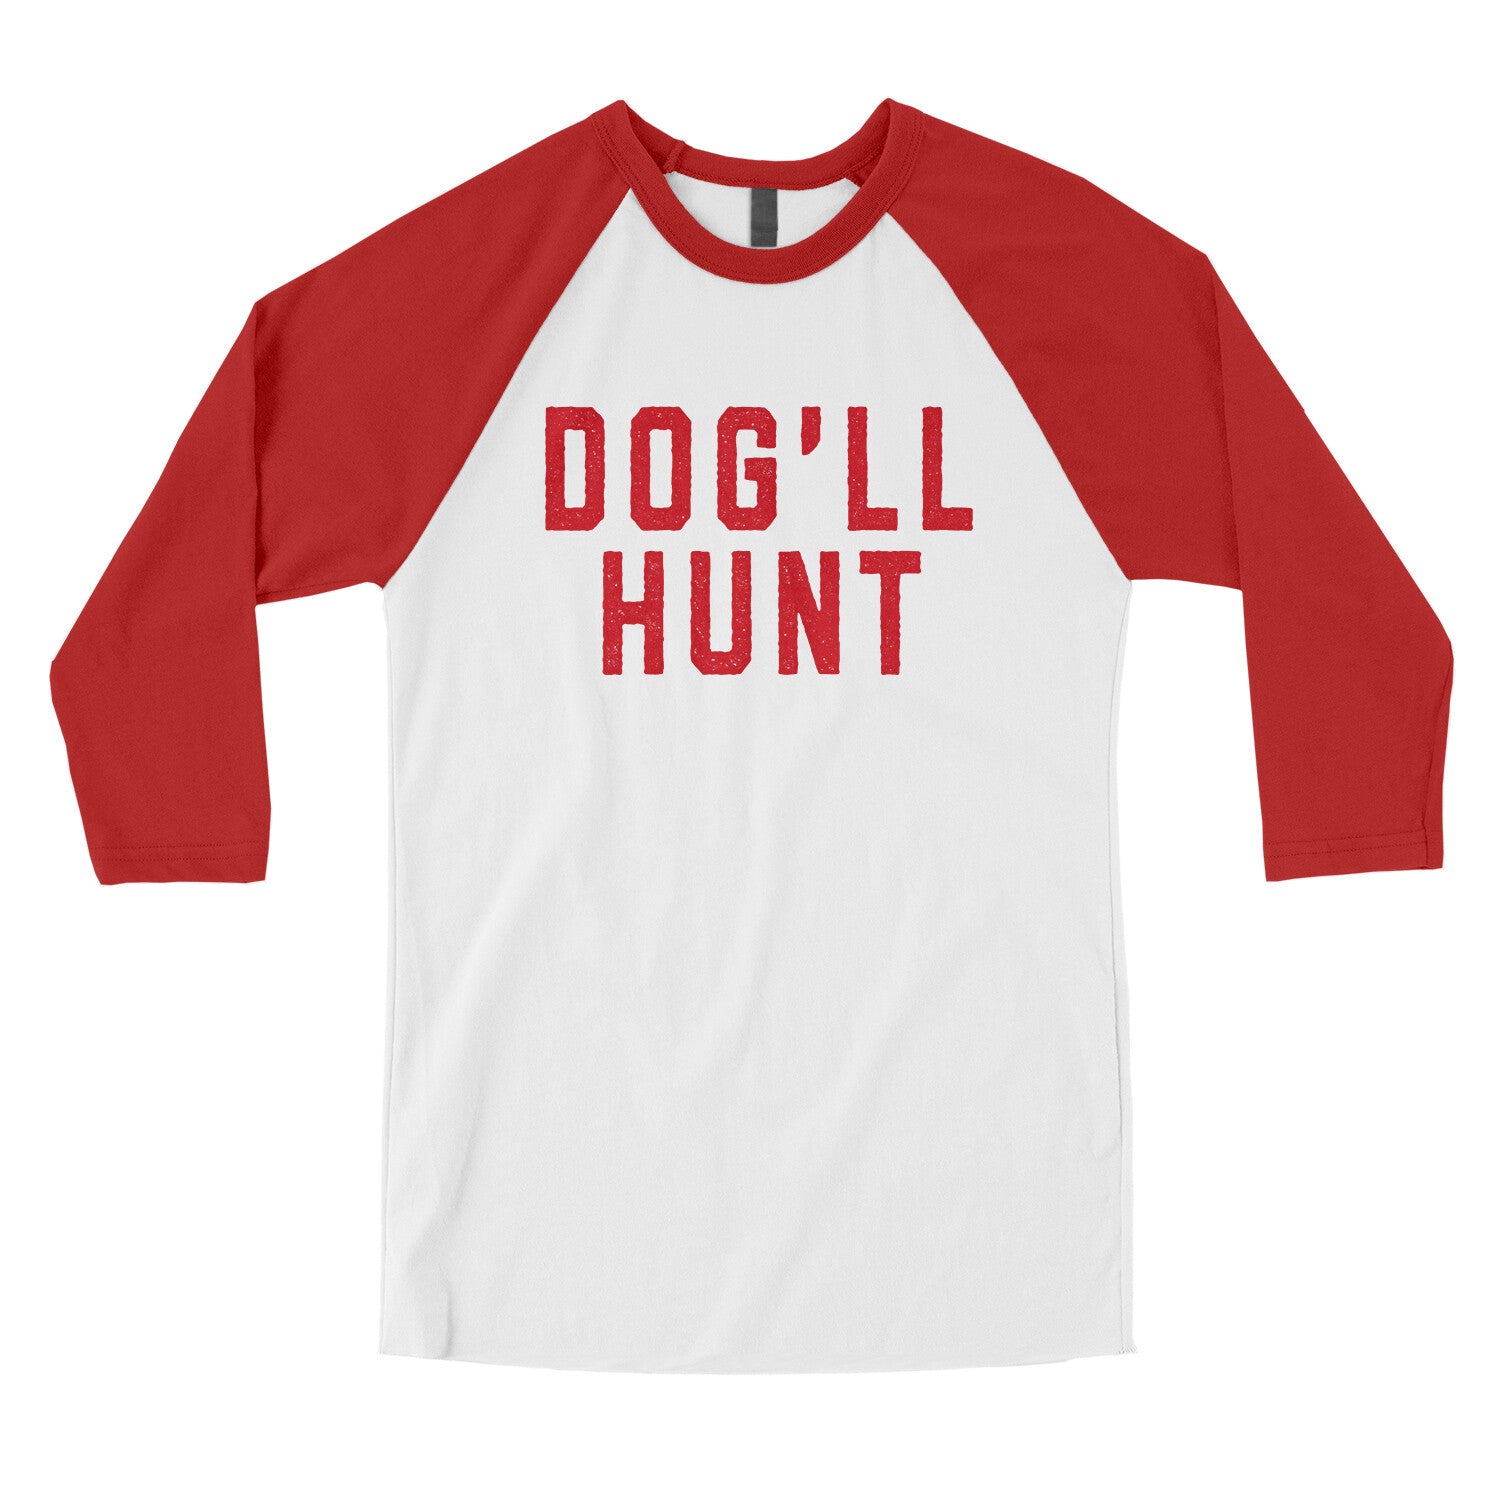 Dog’ll Hunt in White with Red Color